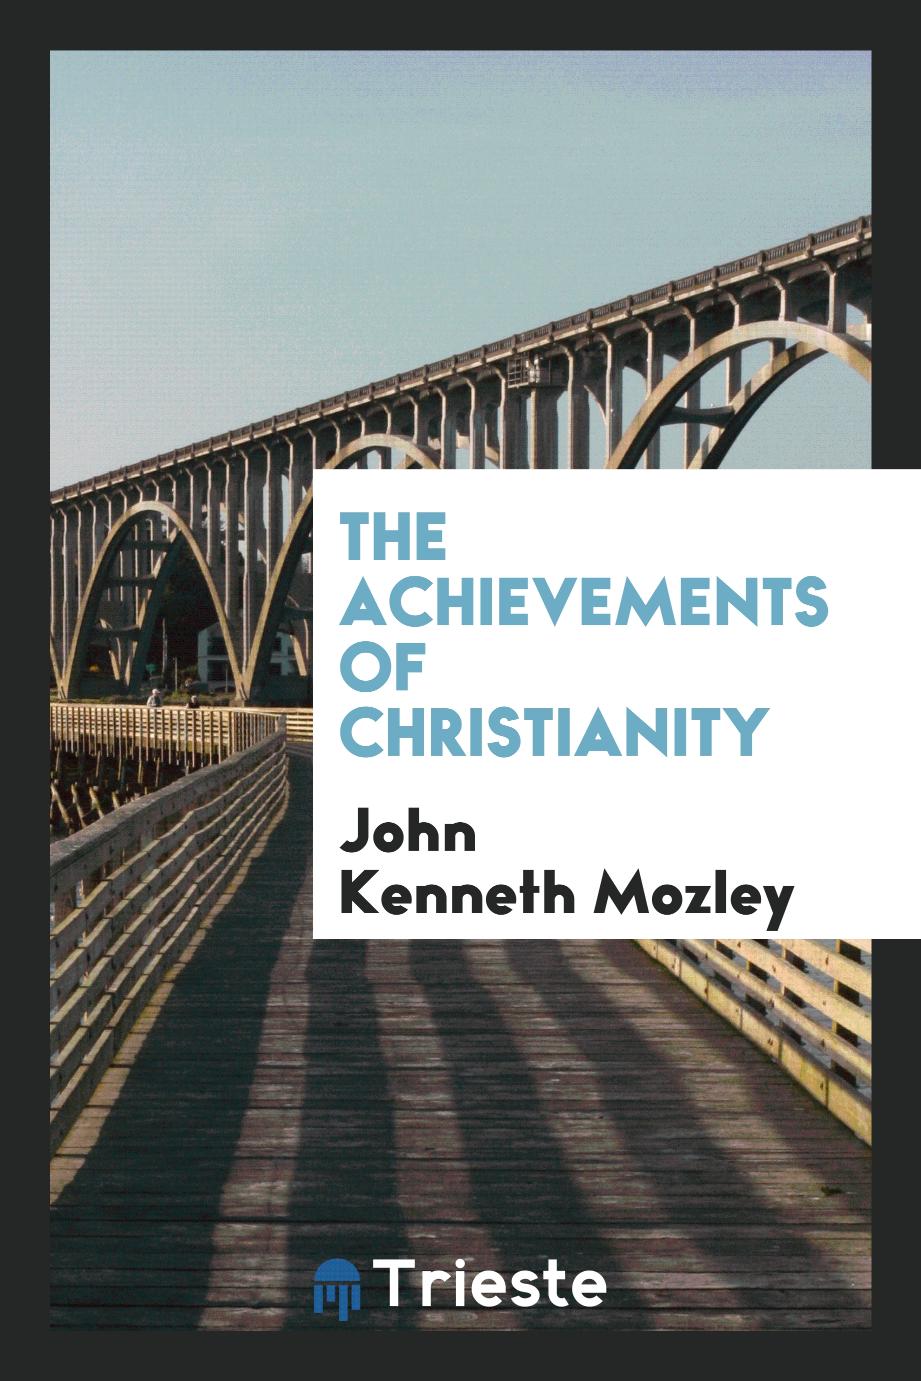 The achievements of Christianity